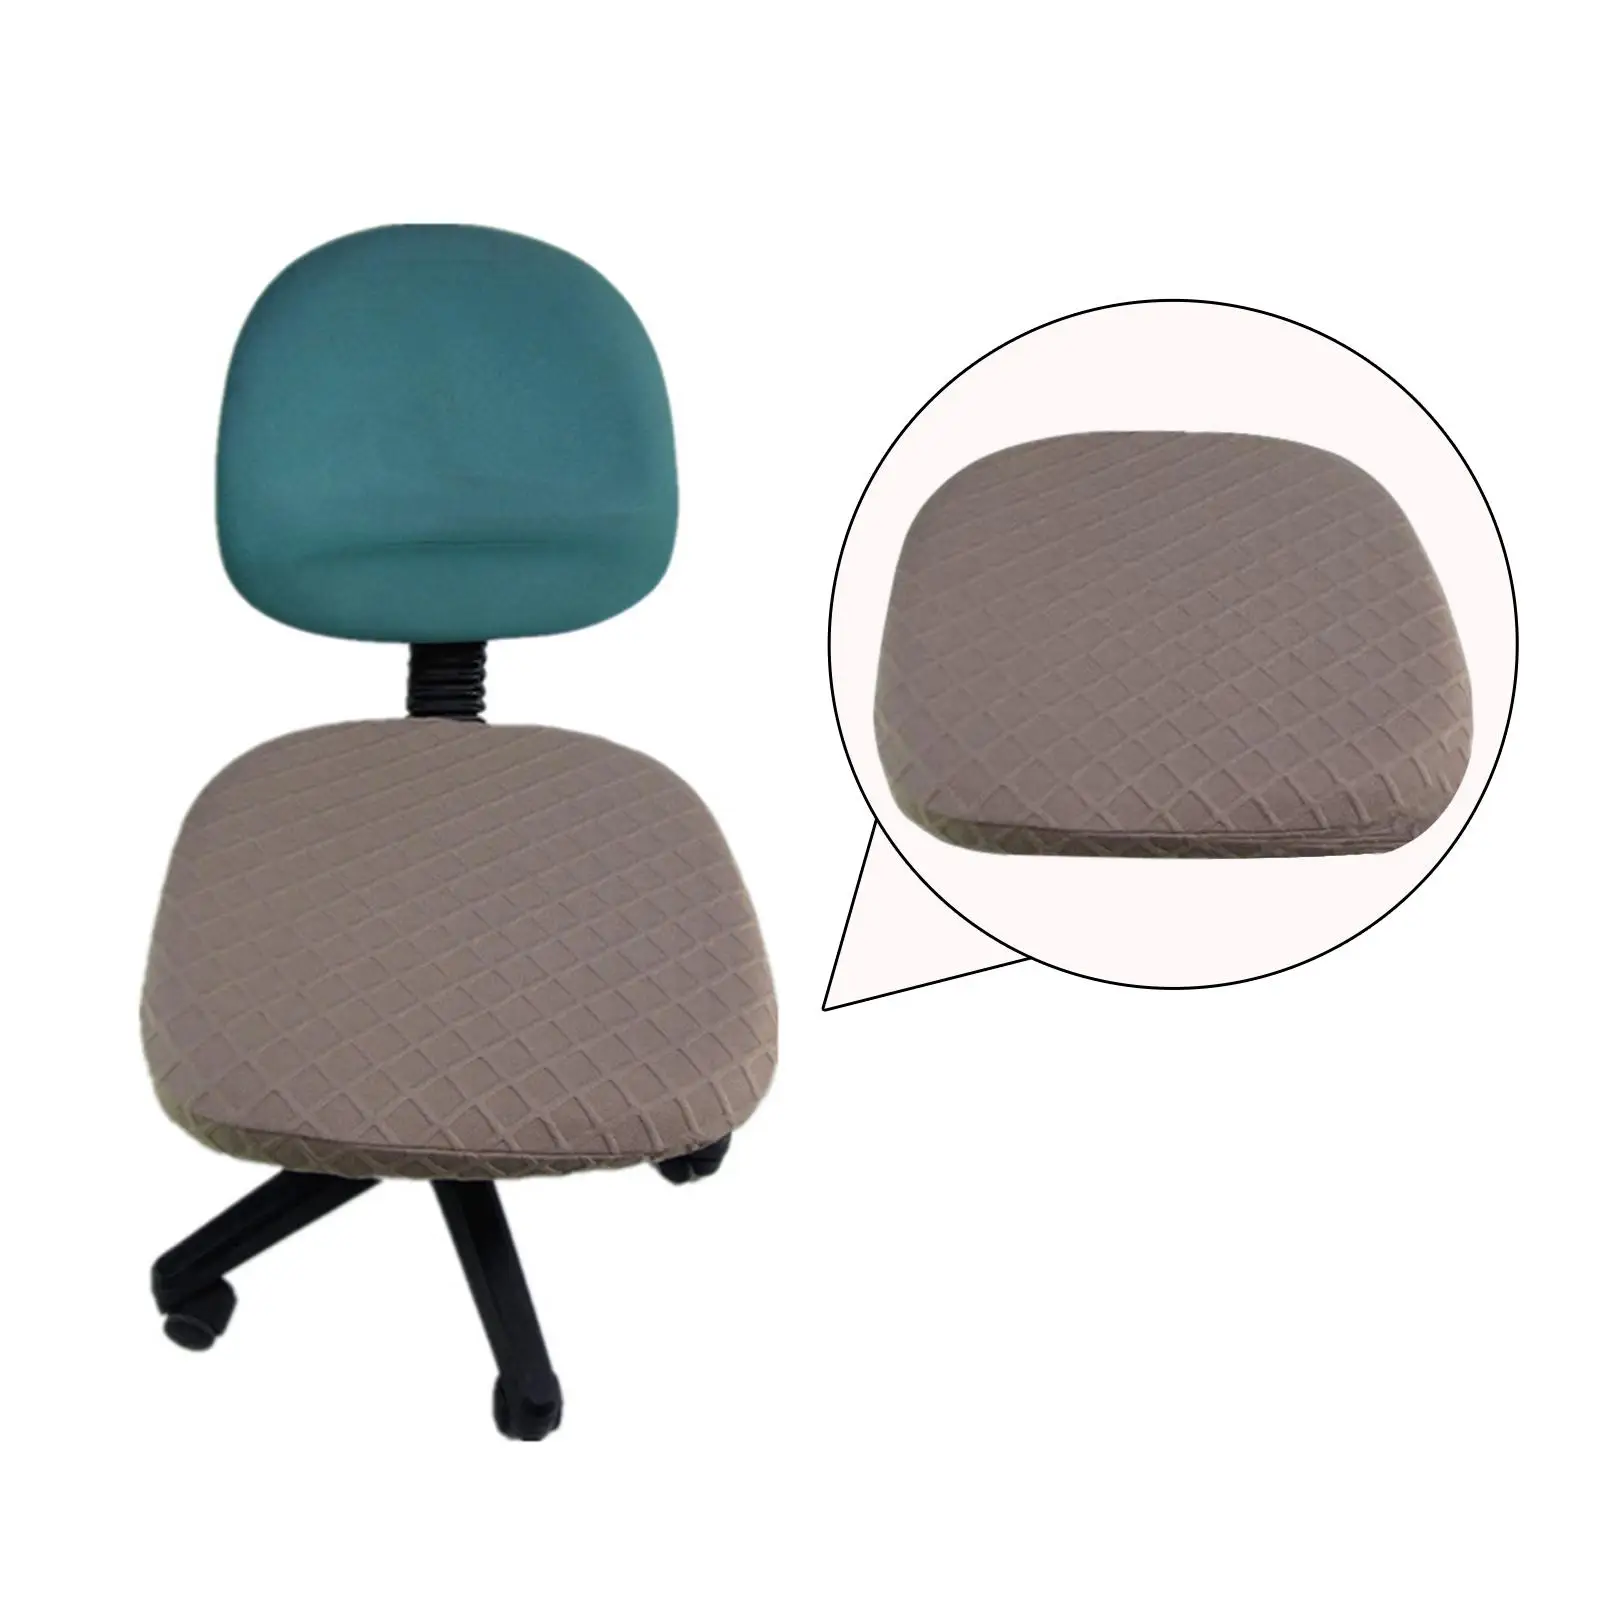 Stretchable Jacquard Office Computer Chair Cushion Seat Cover Machine Wash for Square or Round Seat Cushions Solid Pattern